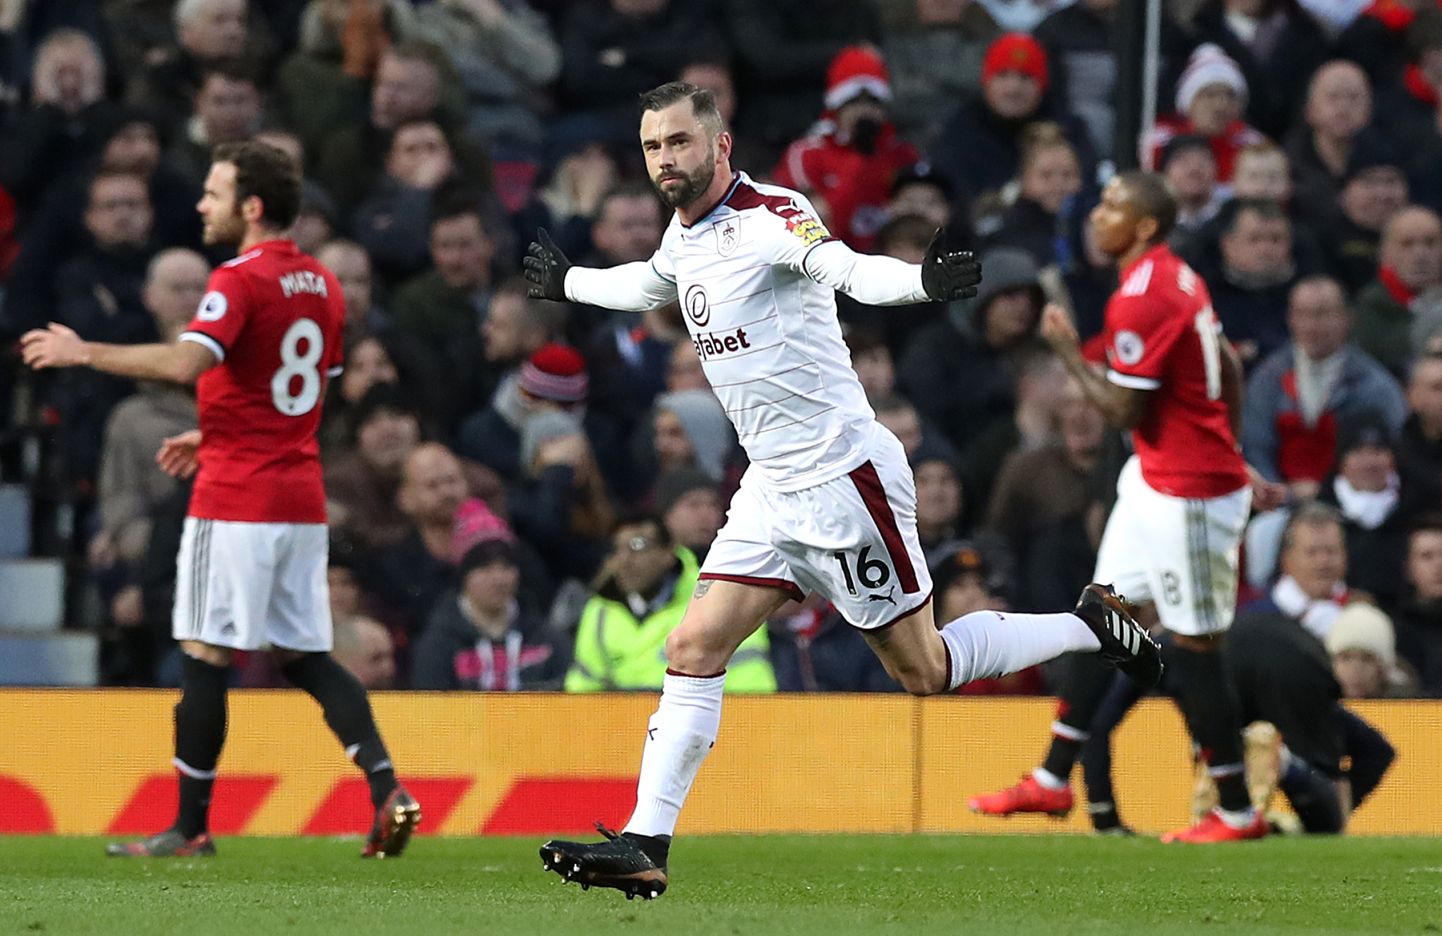 Burnley's Steven Defour celebrates scoring his side's second goal during the Premier League match at Old Trafford, Manchester.